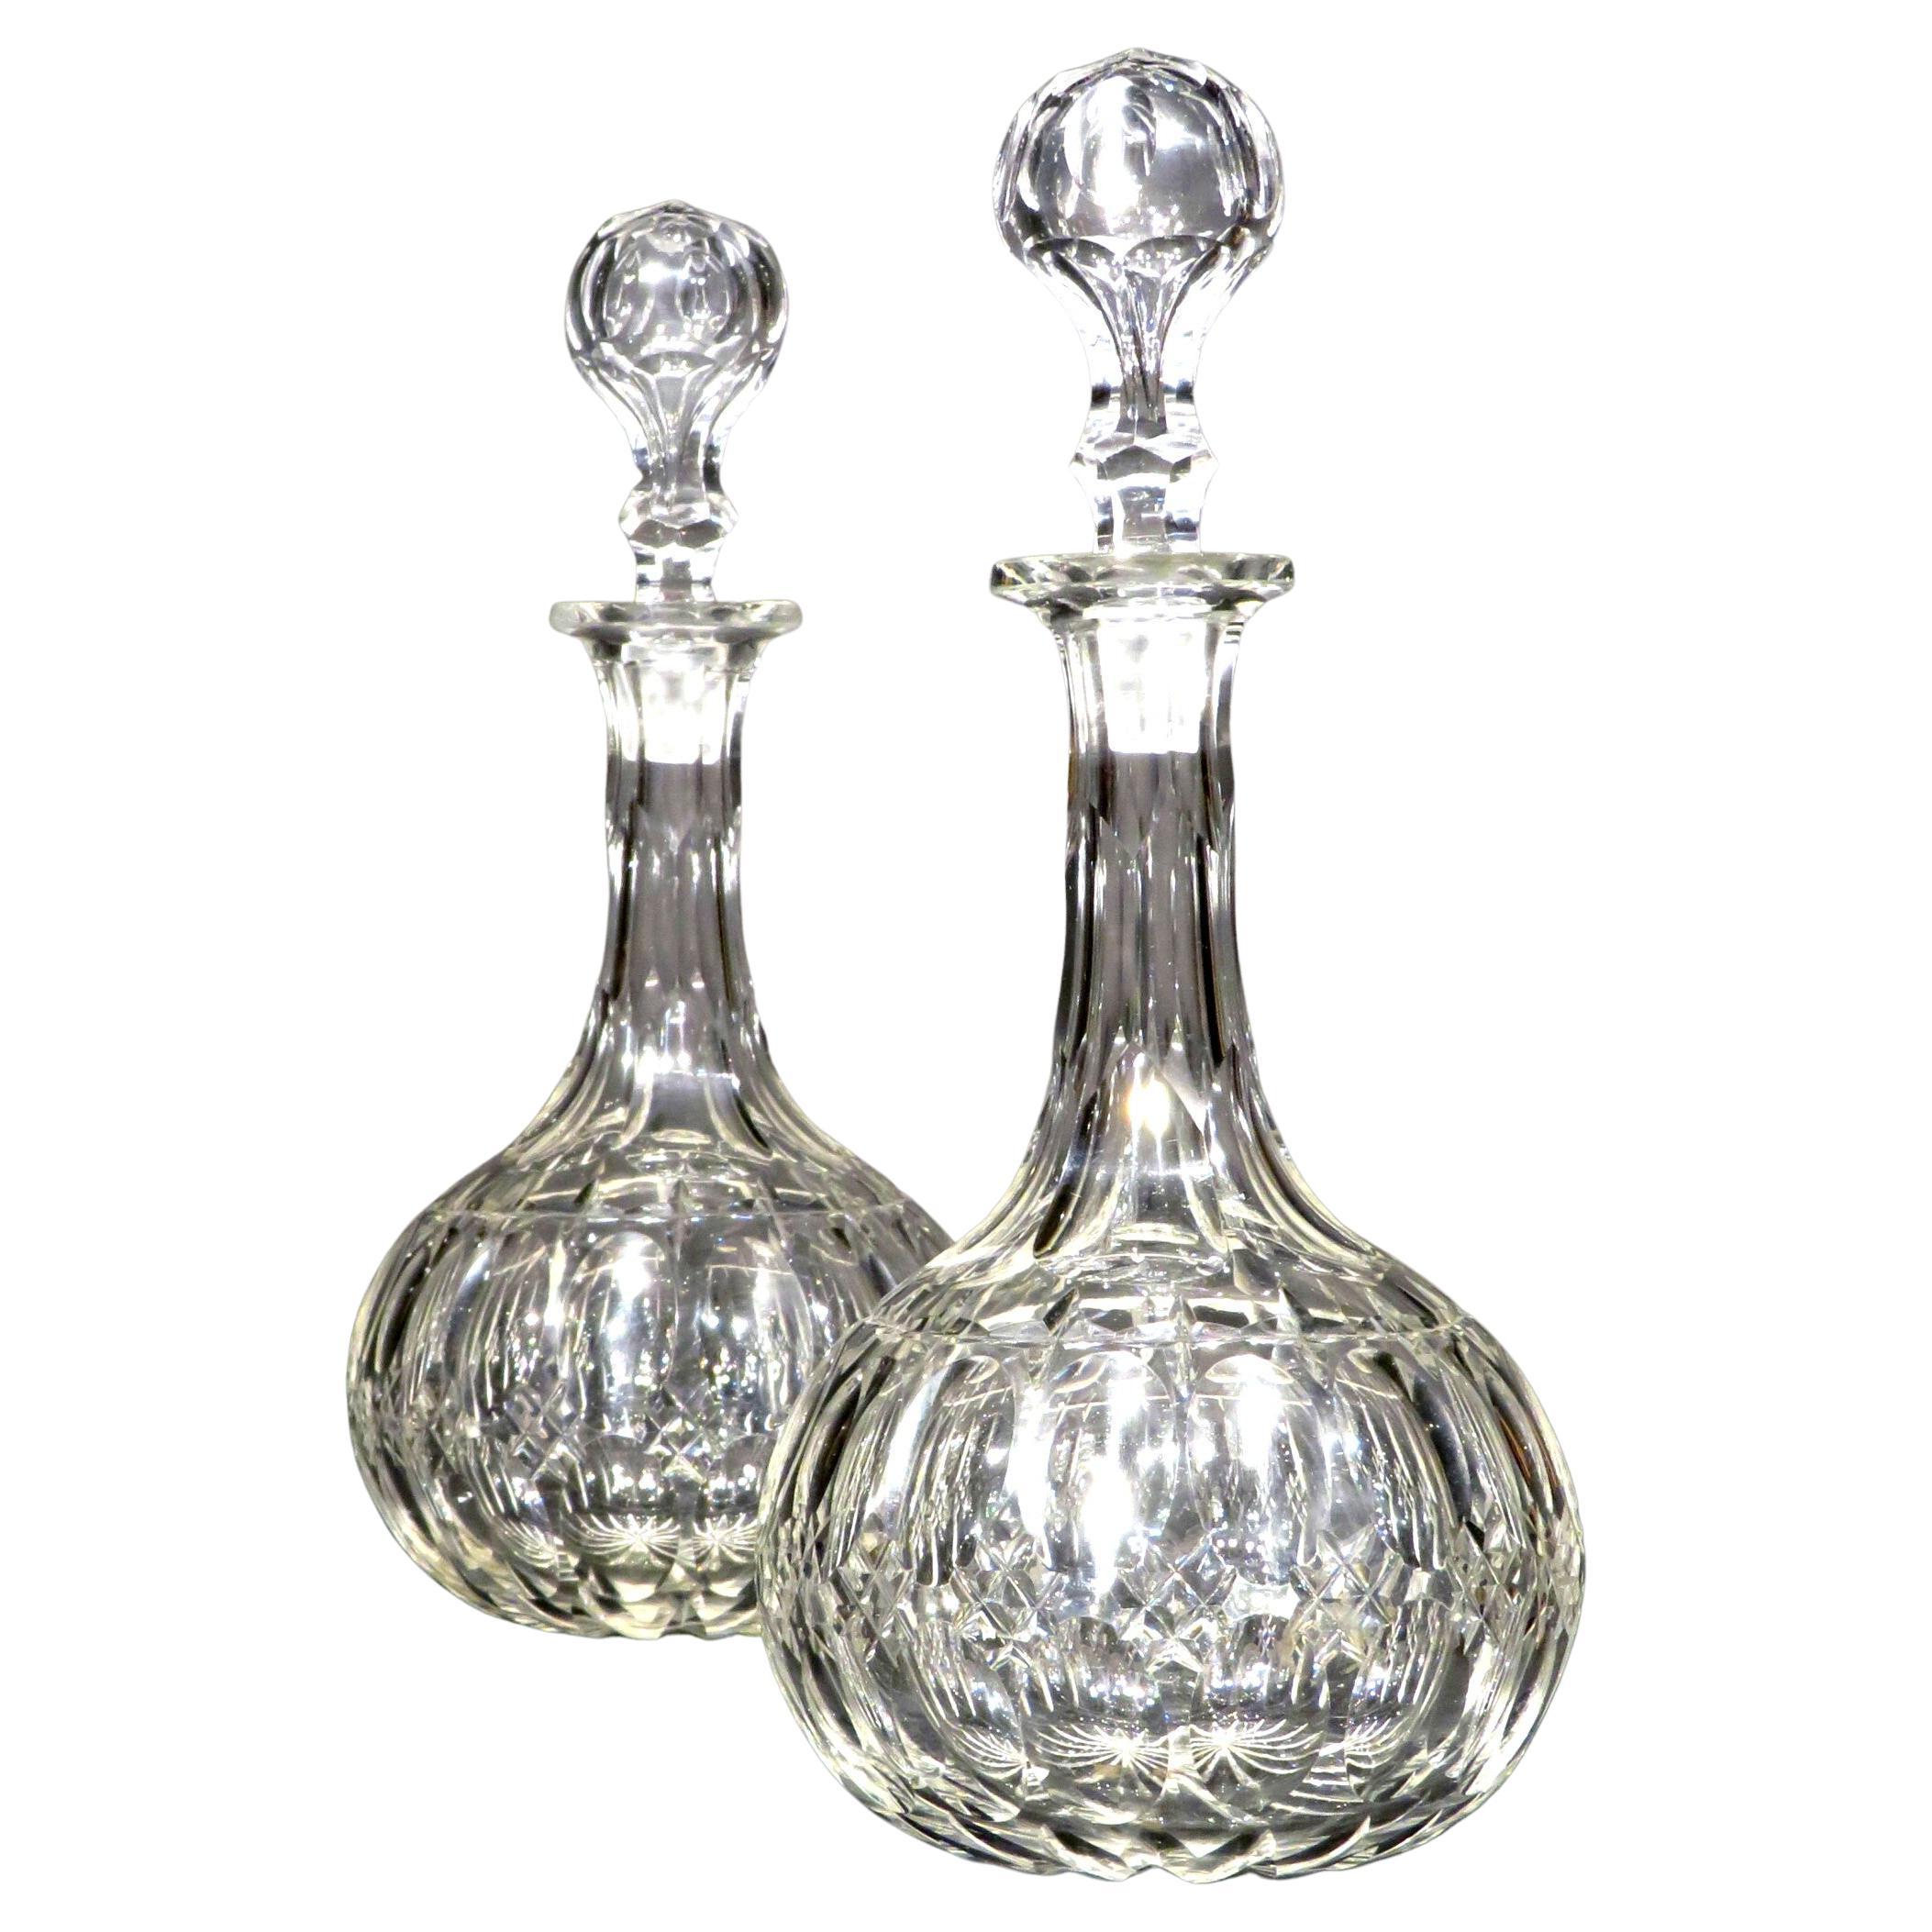 A very handsome matched pair of 19th century cut glass decanters, both showing necks with navette & scalloped vertical cut flutes, their bases decorated with alternating bands of star cut motifs & scalloped flutes, their undersides having incised